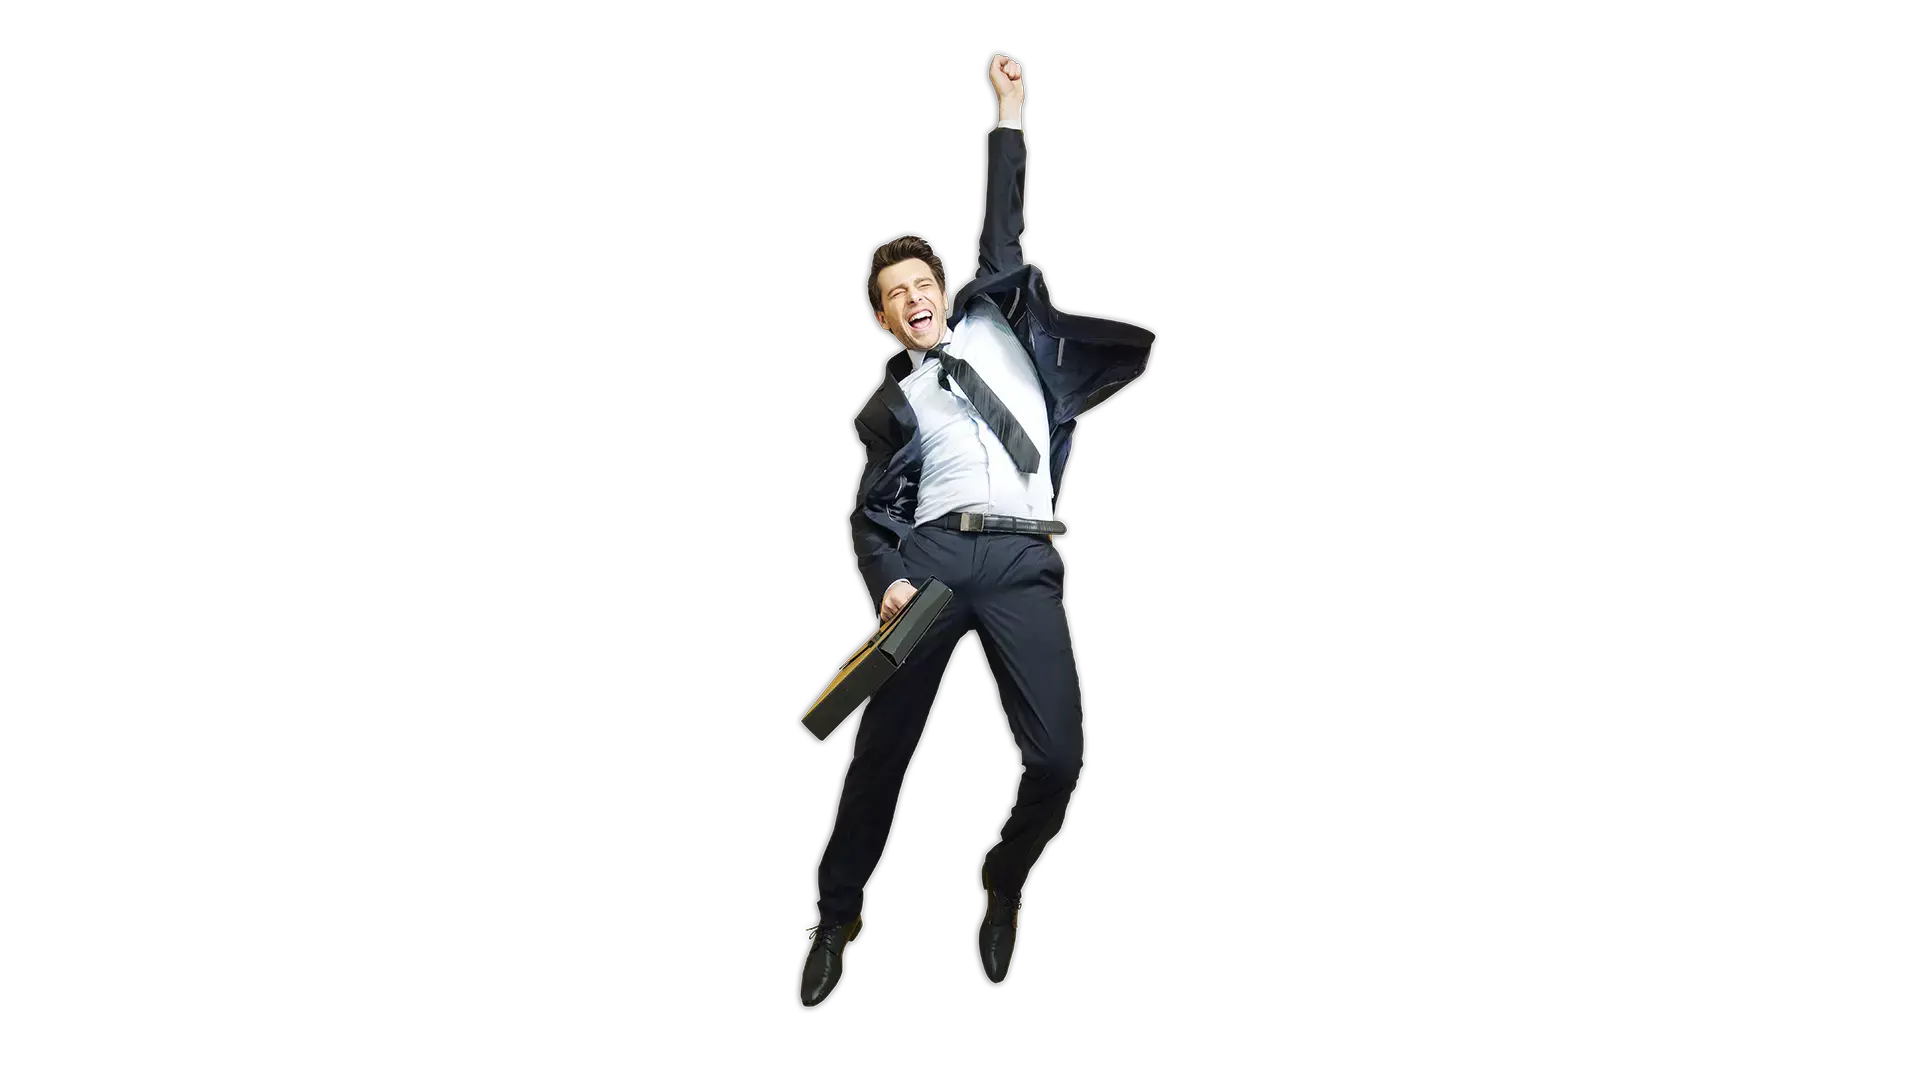 A man jumping in business attire.